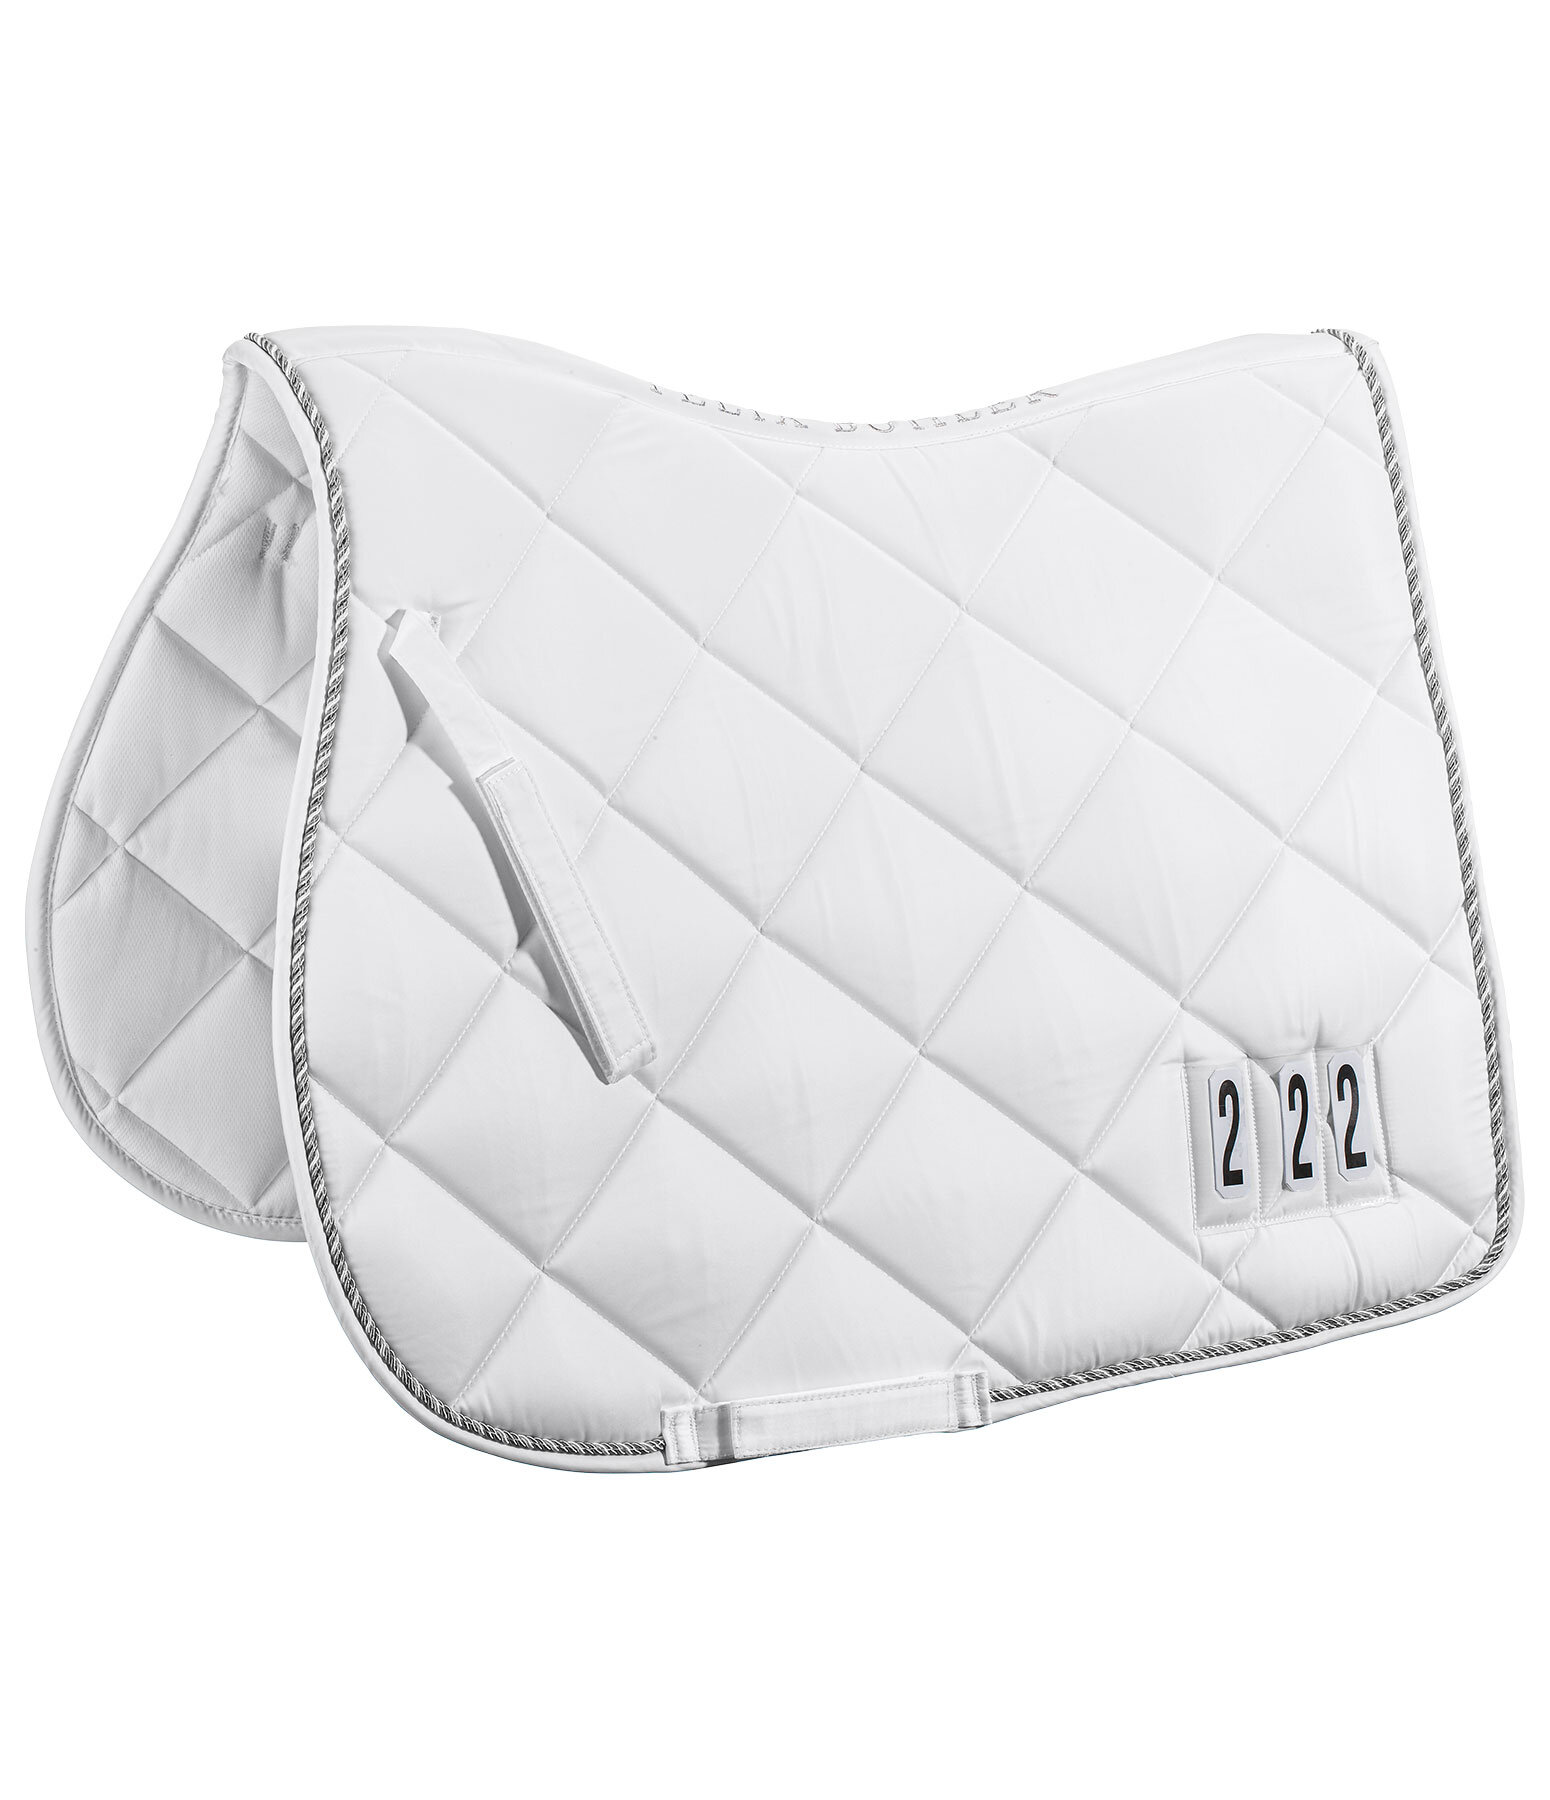 Competition Saddle Pad Numbers II